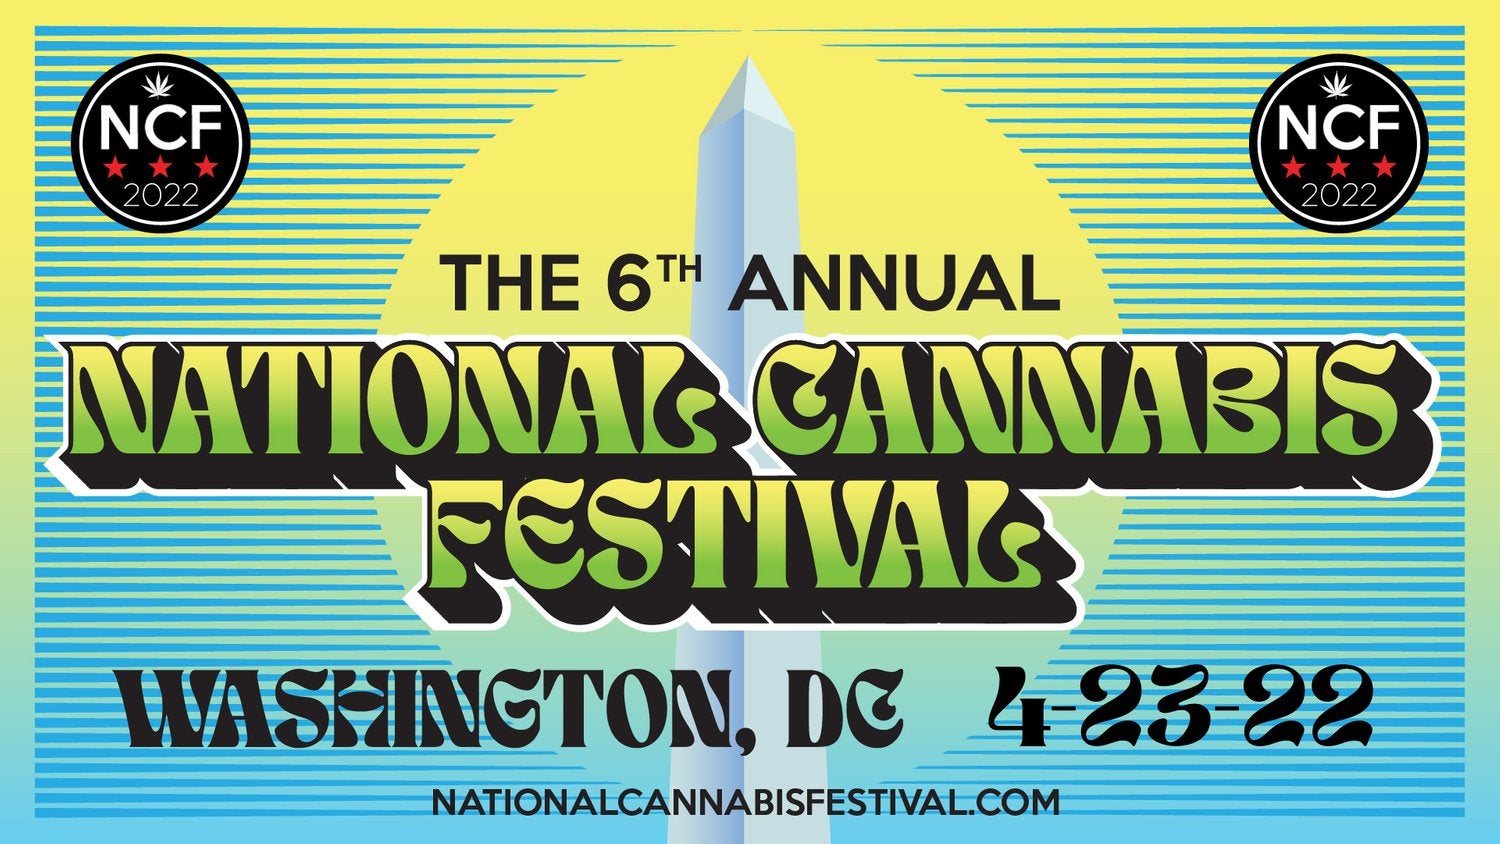 The National Cannabis Festival Events DC